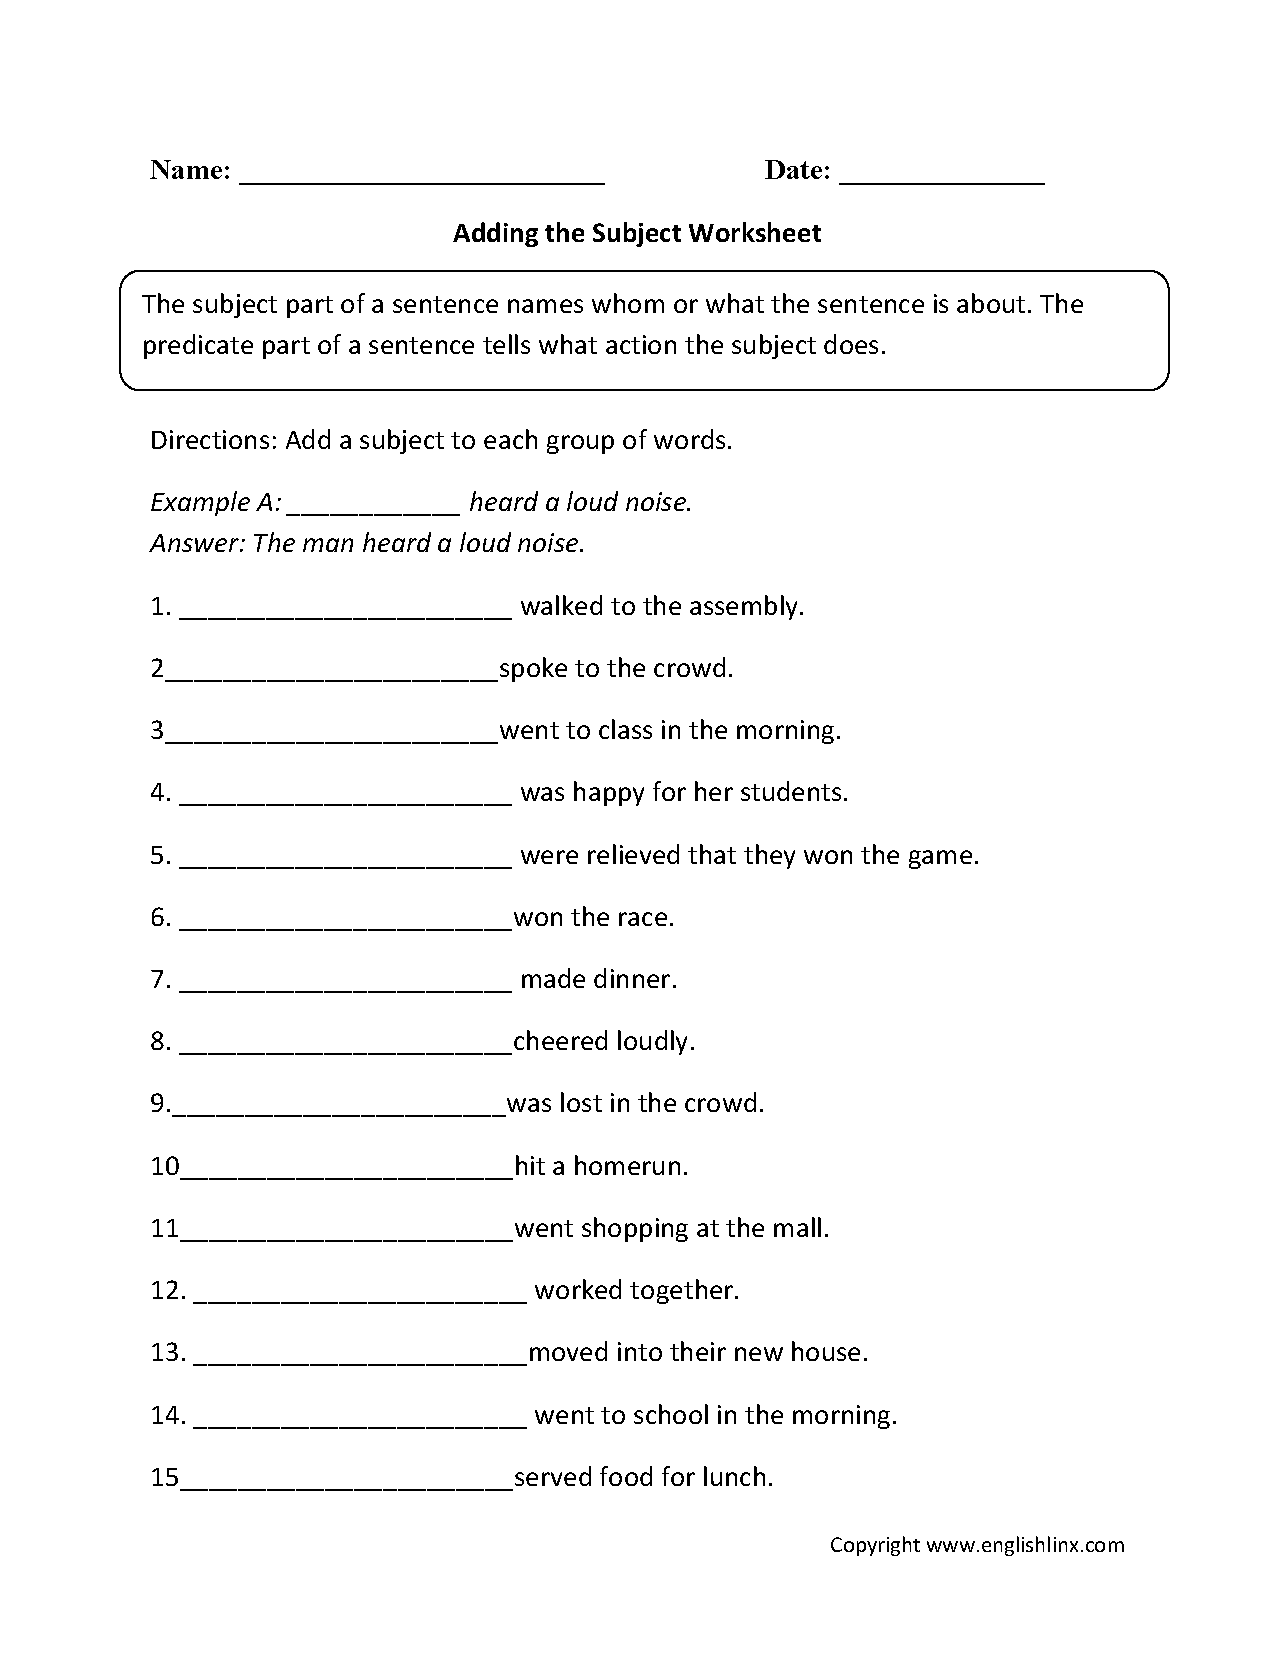 Adding a Subject Worksheet